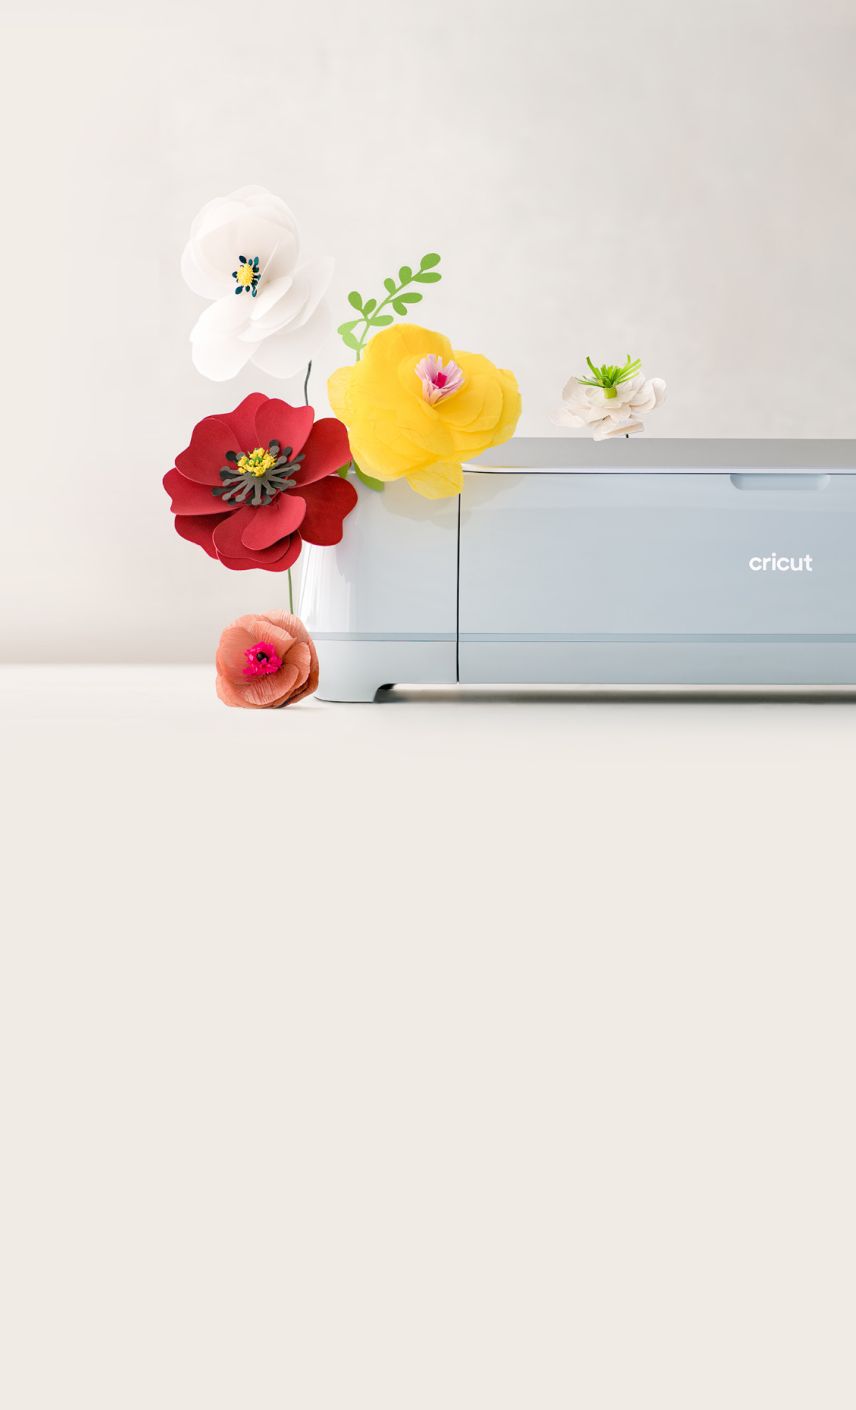 Cricut machine decorated with flowers